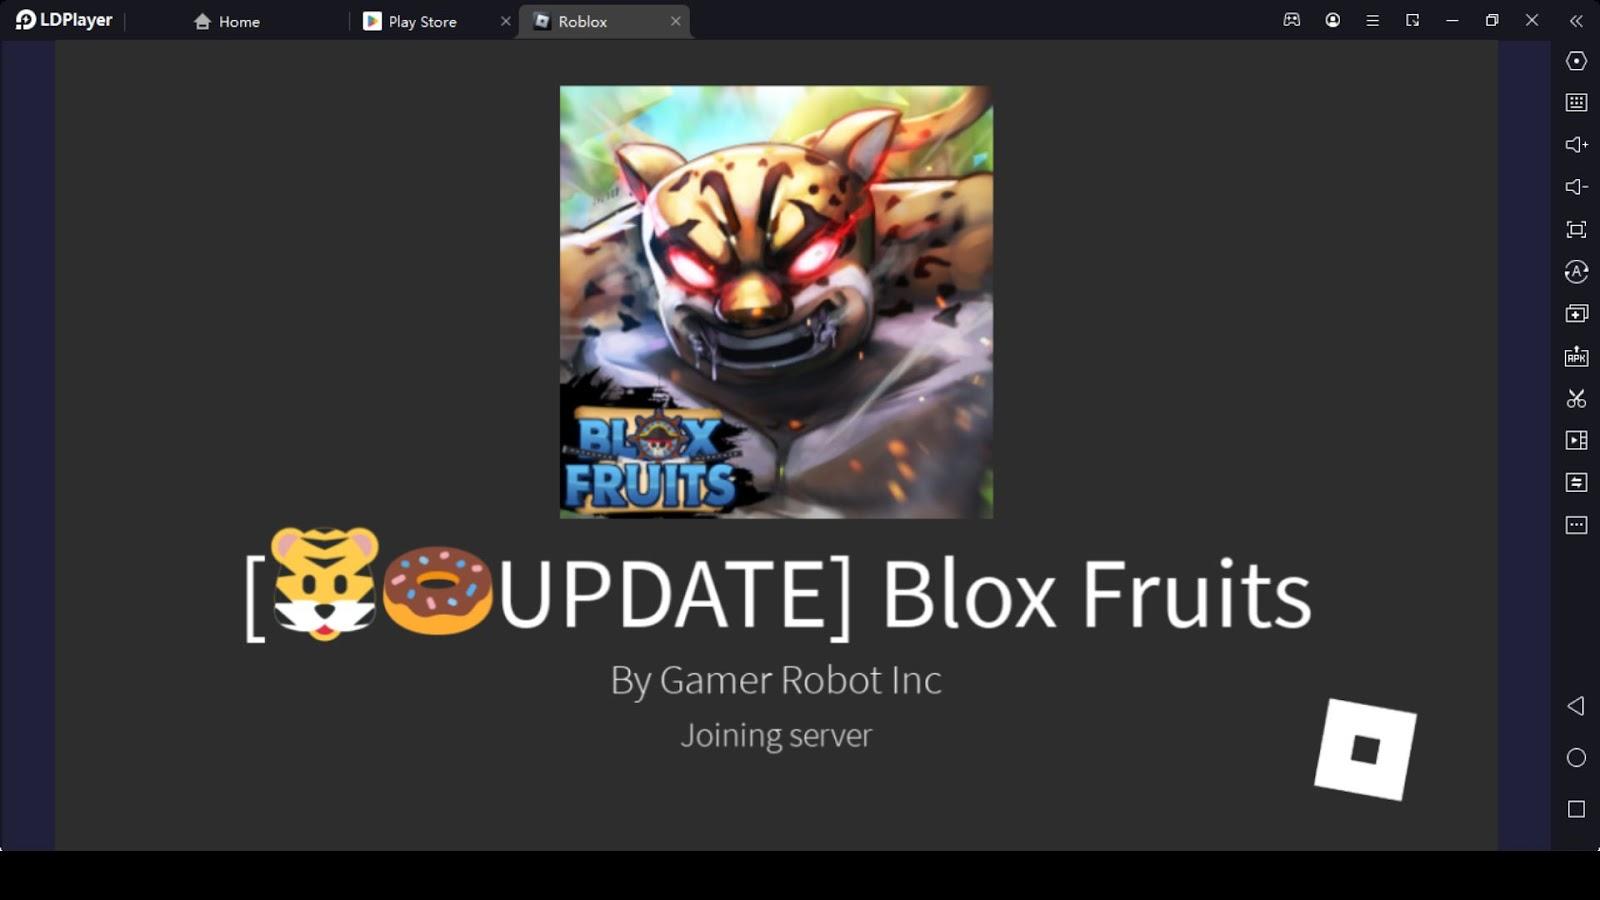 Roblox Blox Fruits Map Guide with all the NPCs-Game Guides-LDPlayer